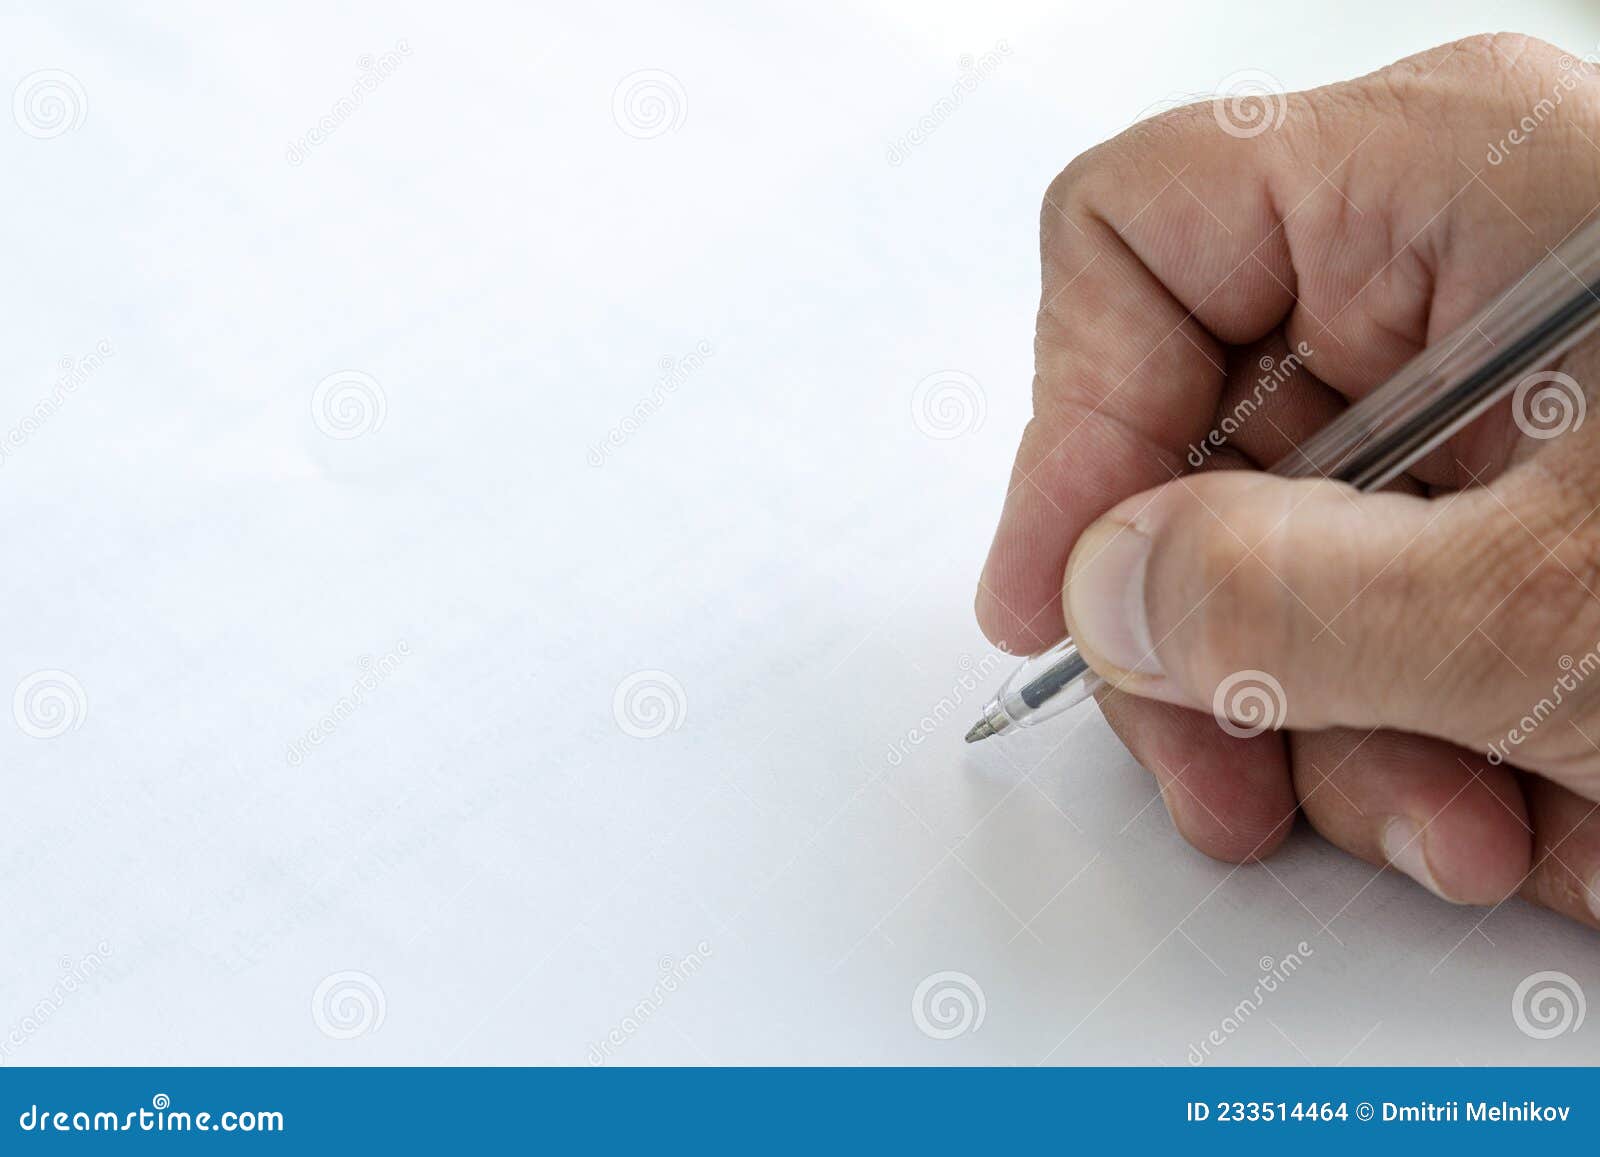 Human Hand Signing Blank White Sheet of Paper Using Pen. Copy Space for ...